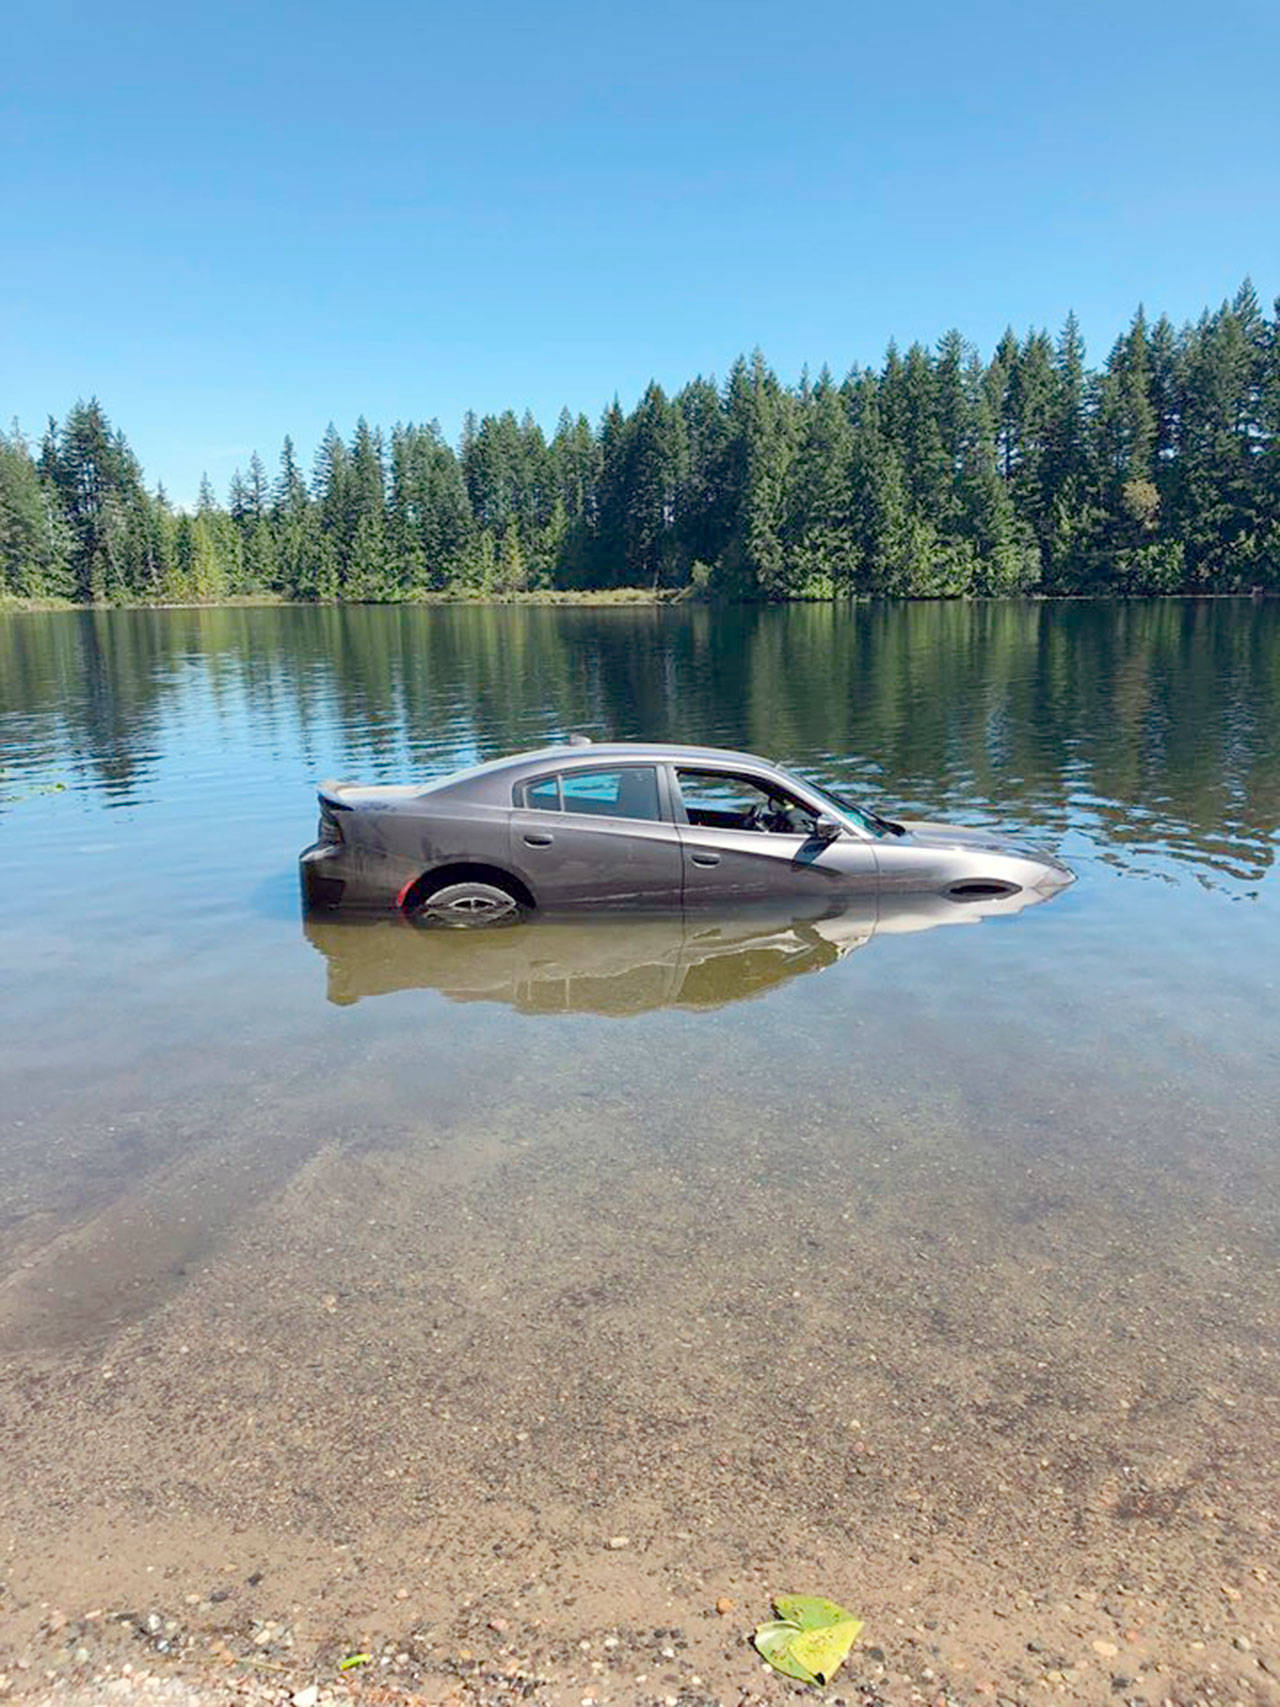 A car was partially submerged in Sandy Shore Lake earlier this week. (Jefferson County Sheriff’s Office)